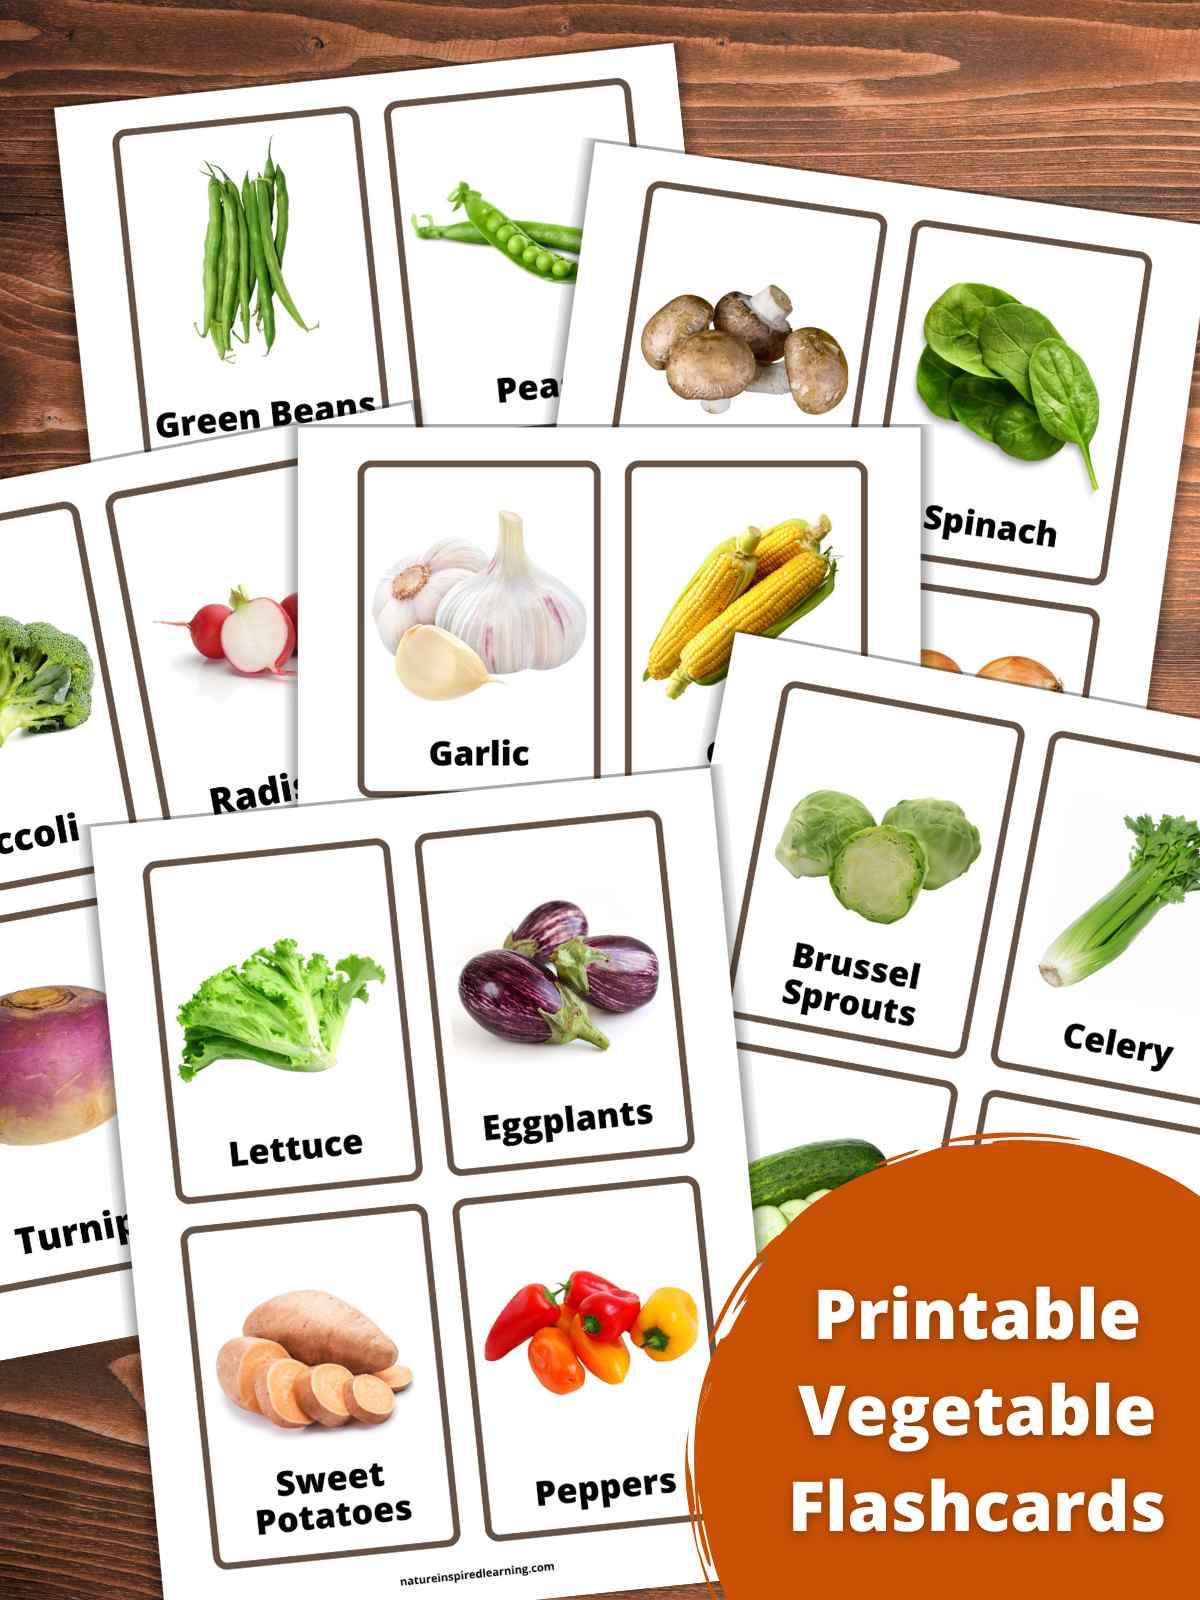 collection of printable flashcards overlapping each other with colorful images of each vegetable and a label all on a wooden background with an orange circle bottom right with text overlay.